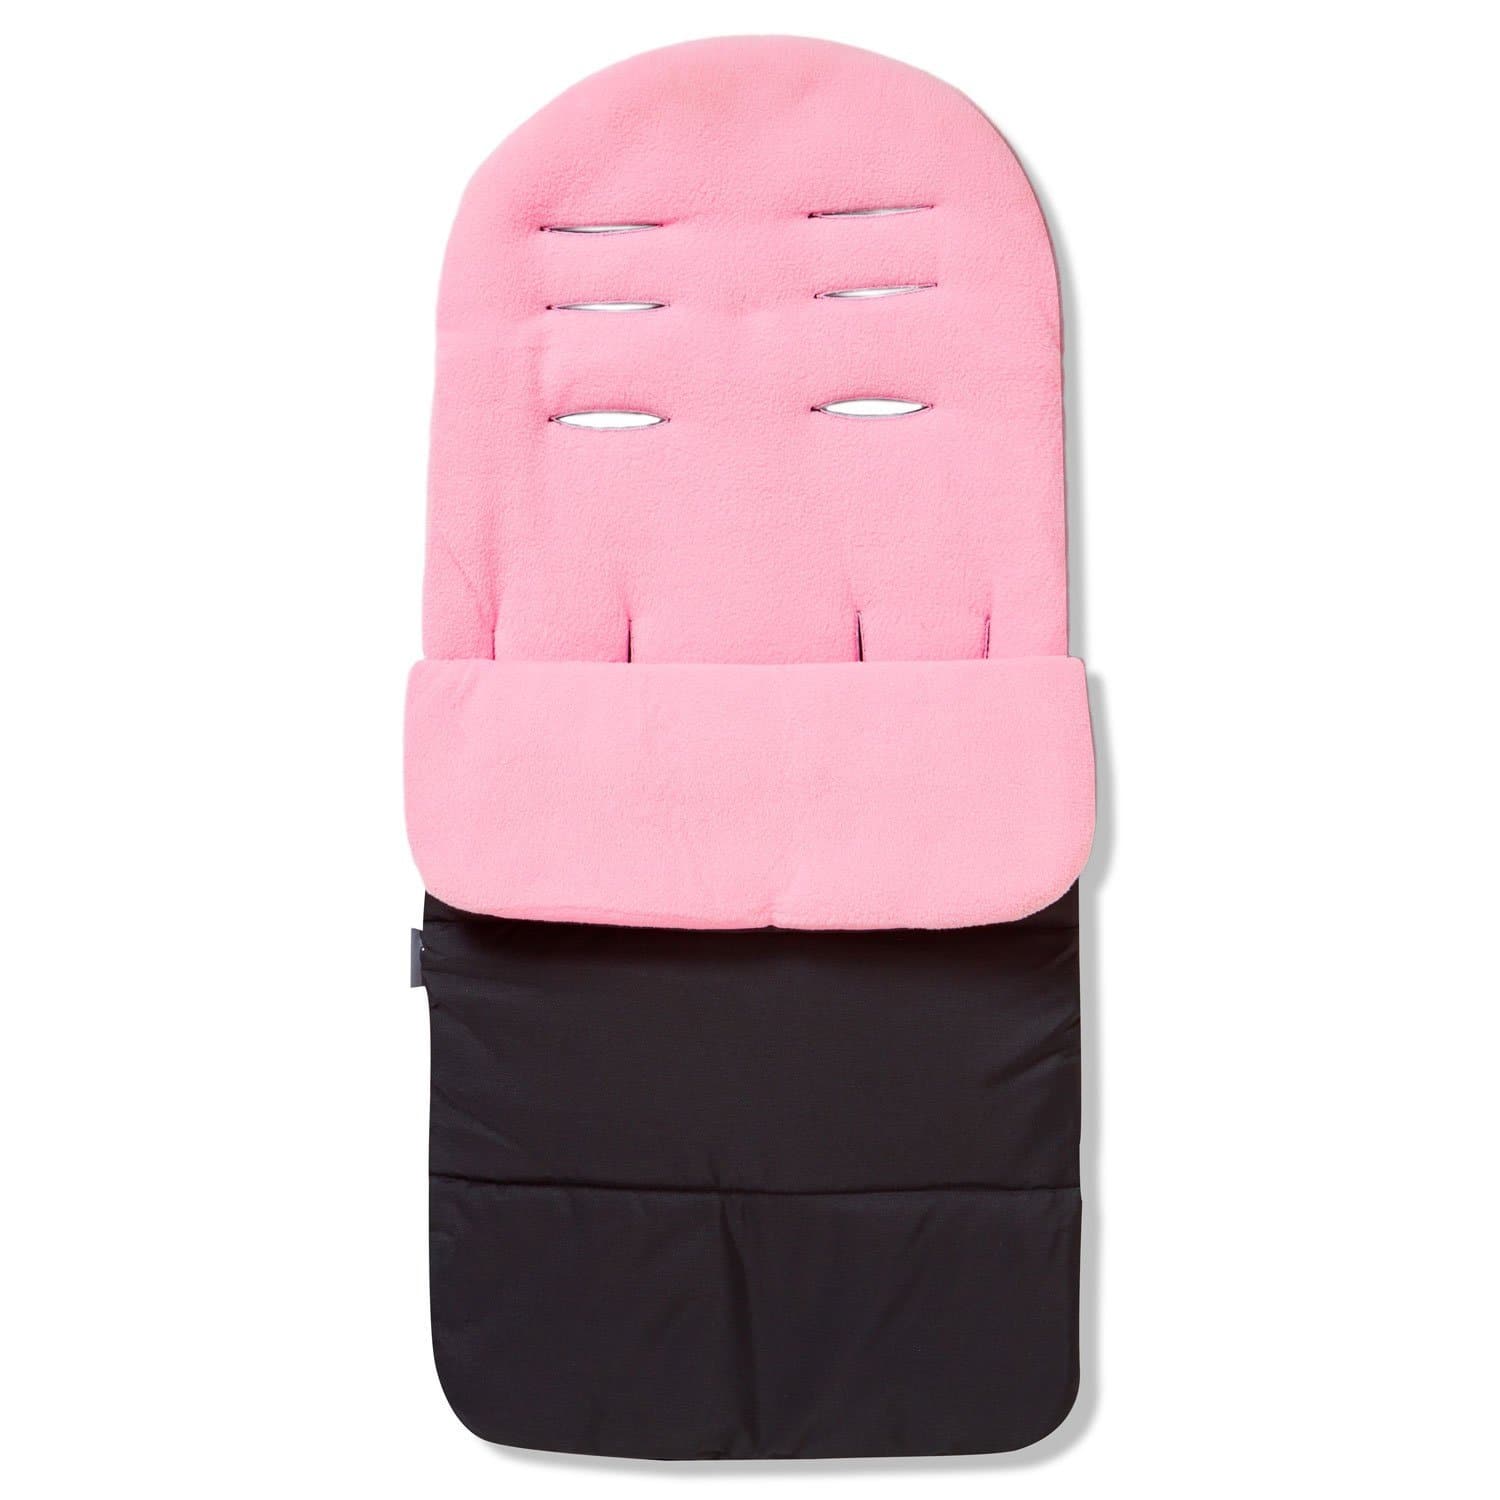 Premium Footmuff / Cosy Toes Compatible with Chicco - Candy Pink / Fits All Models | For Your Little One